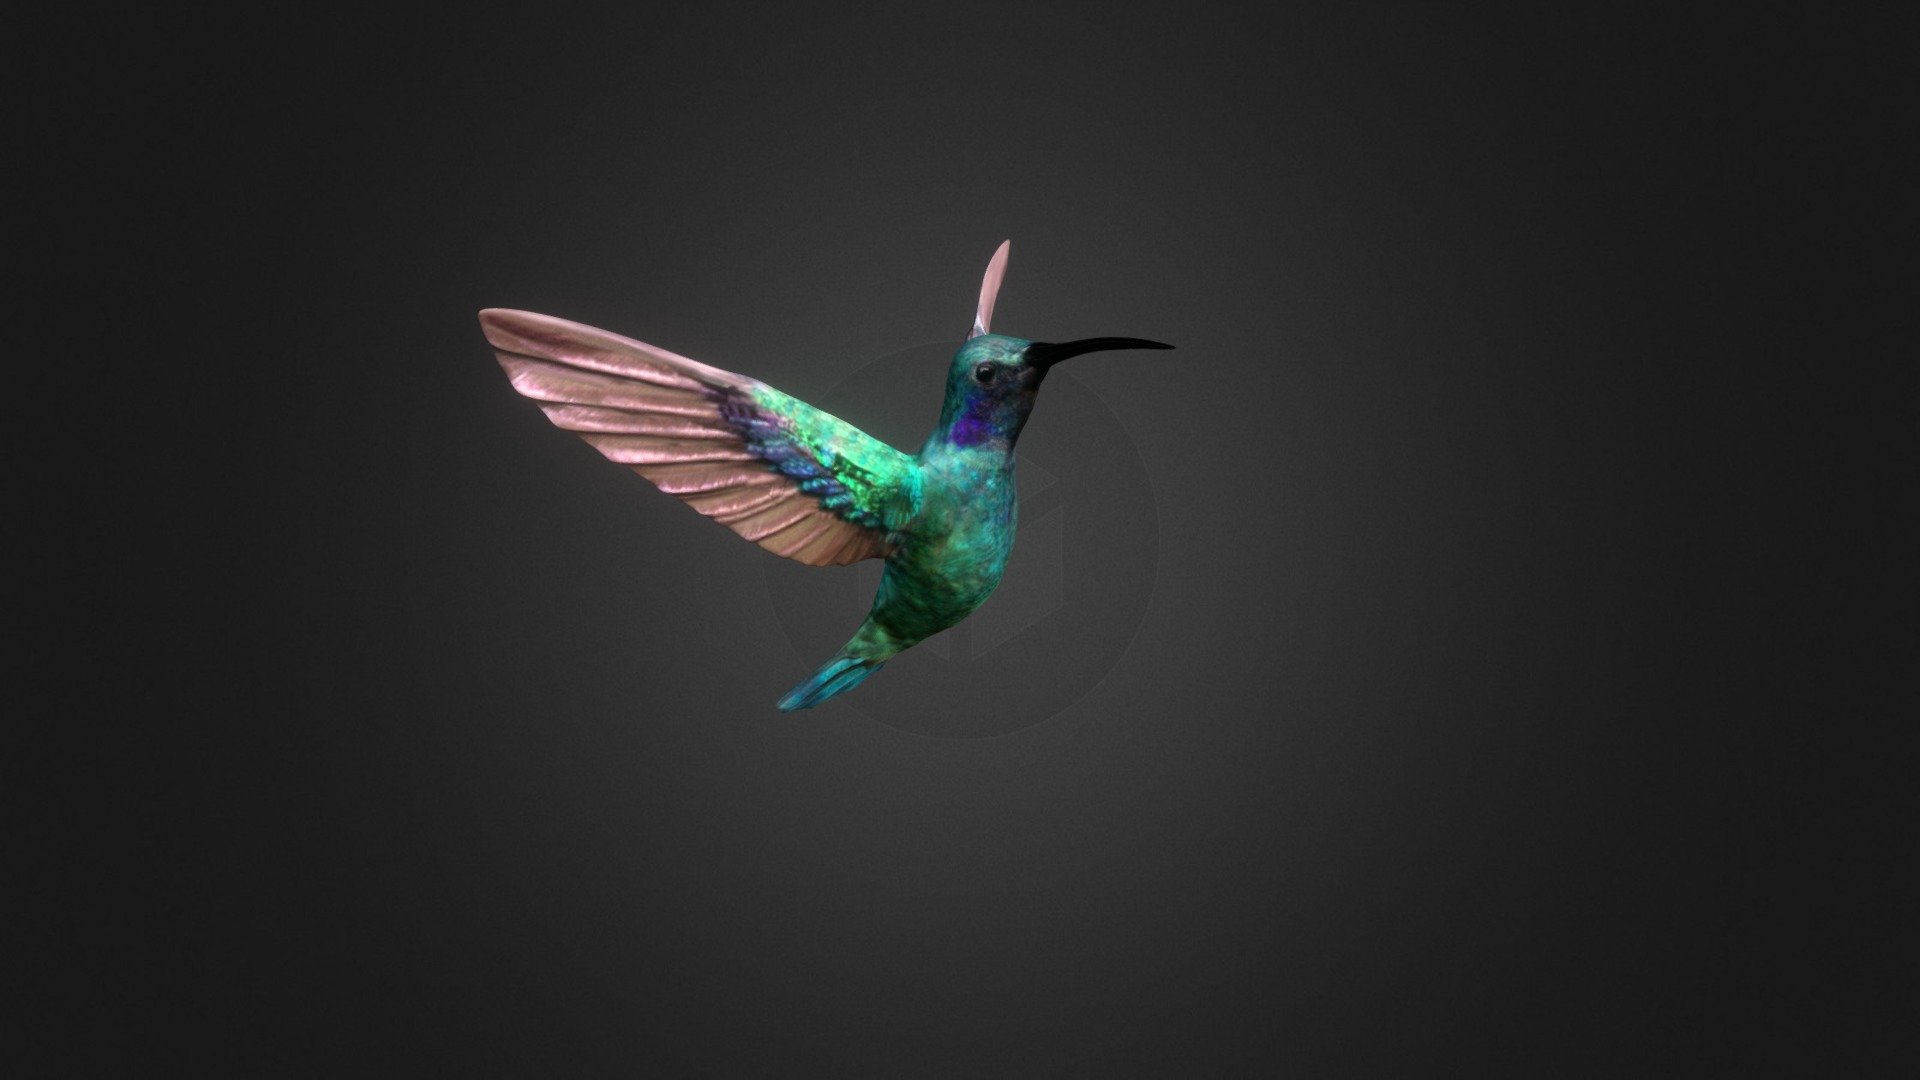 Model used for a case study of diagnostic swabs, inspired by the structure of hummingbird's tongue.

https://www.behance.net/gallery/145802335/CRN_01-Hummingbird-Swabs
https://sygnis.pl/en/crn_01-hummingbird-original-swabs-design/ - Hummingbird - 3D model by SYGNIS New Technologies (@Sygnis) 3d model